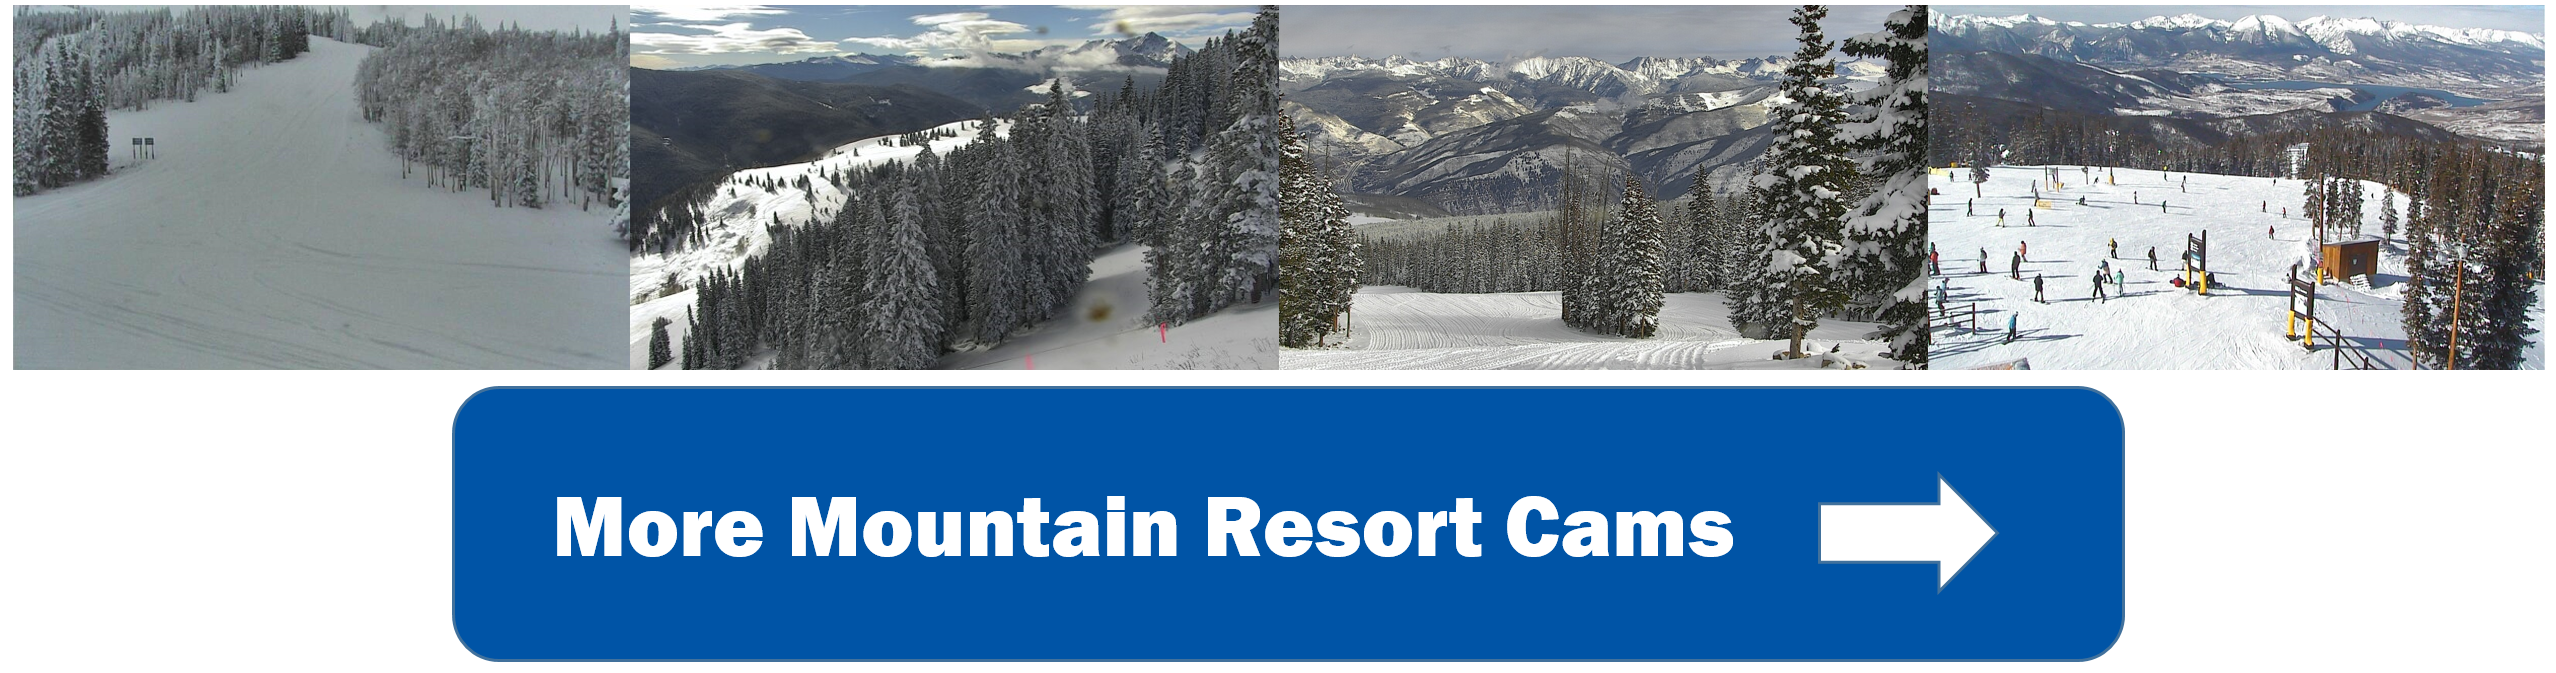 For more live webcams from all your favorite ski resorts, head over to our PowderCAST Homepage.